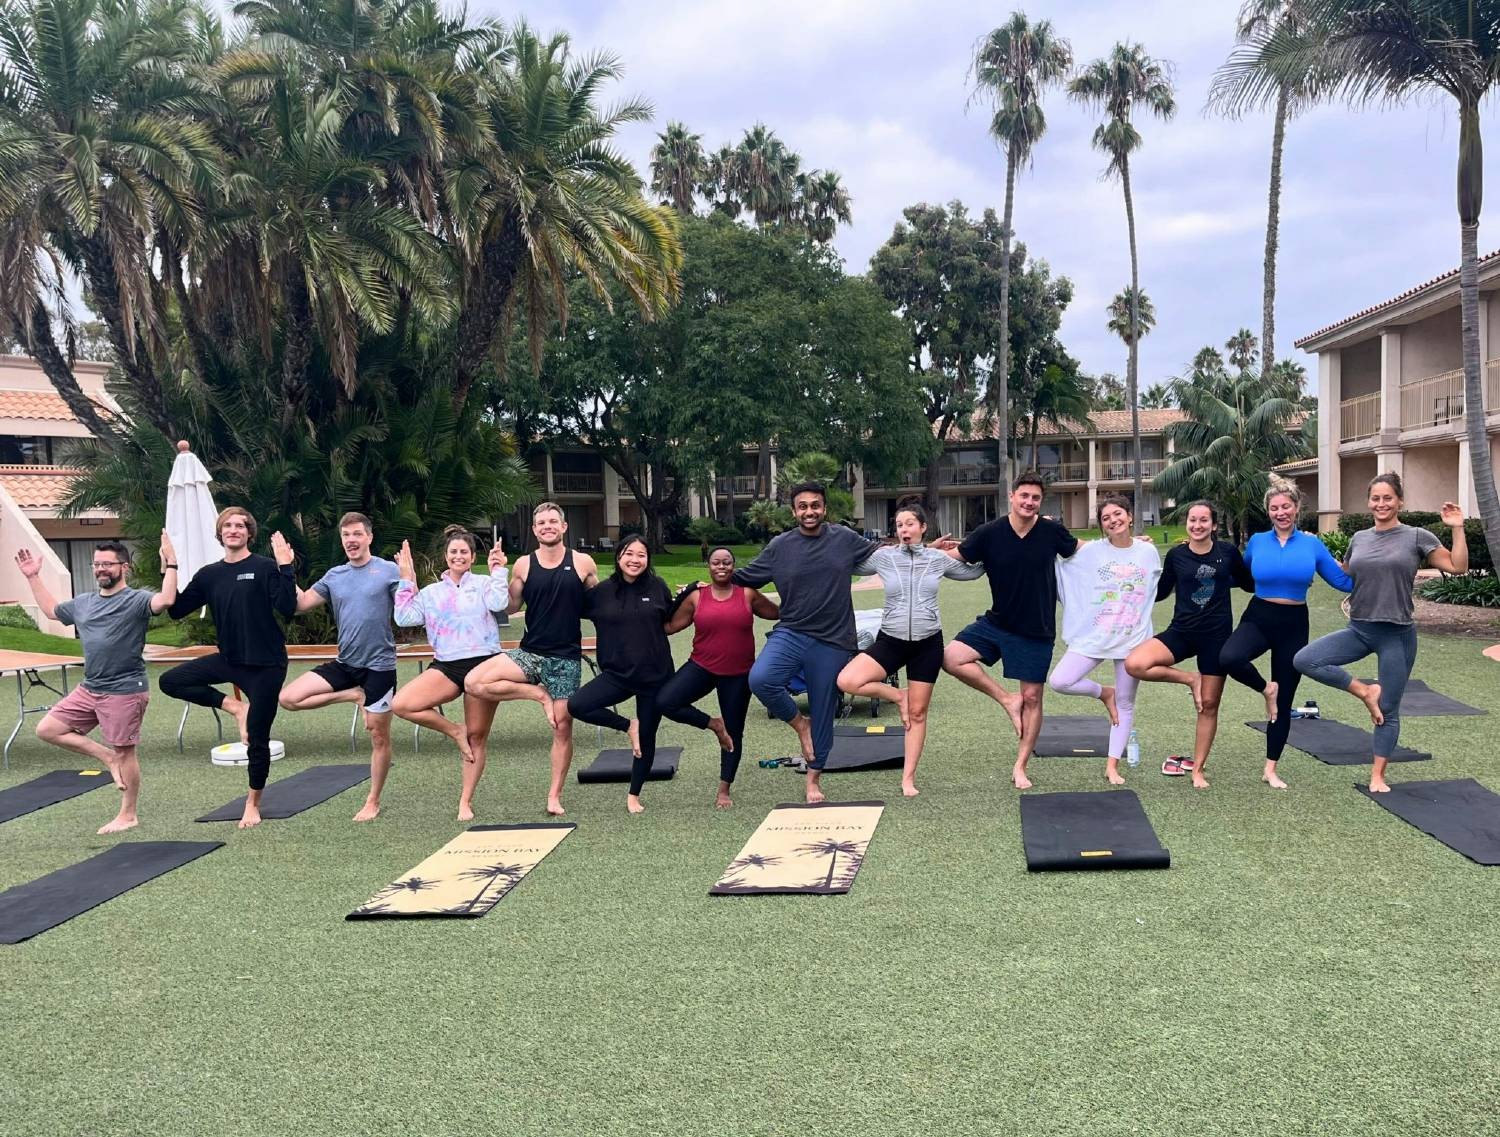 Teammates enjoying some morning yoga during our 2023 company offsite in sunny San Diego, CA!